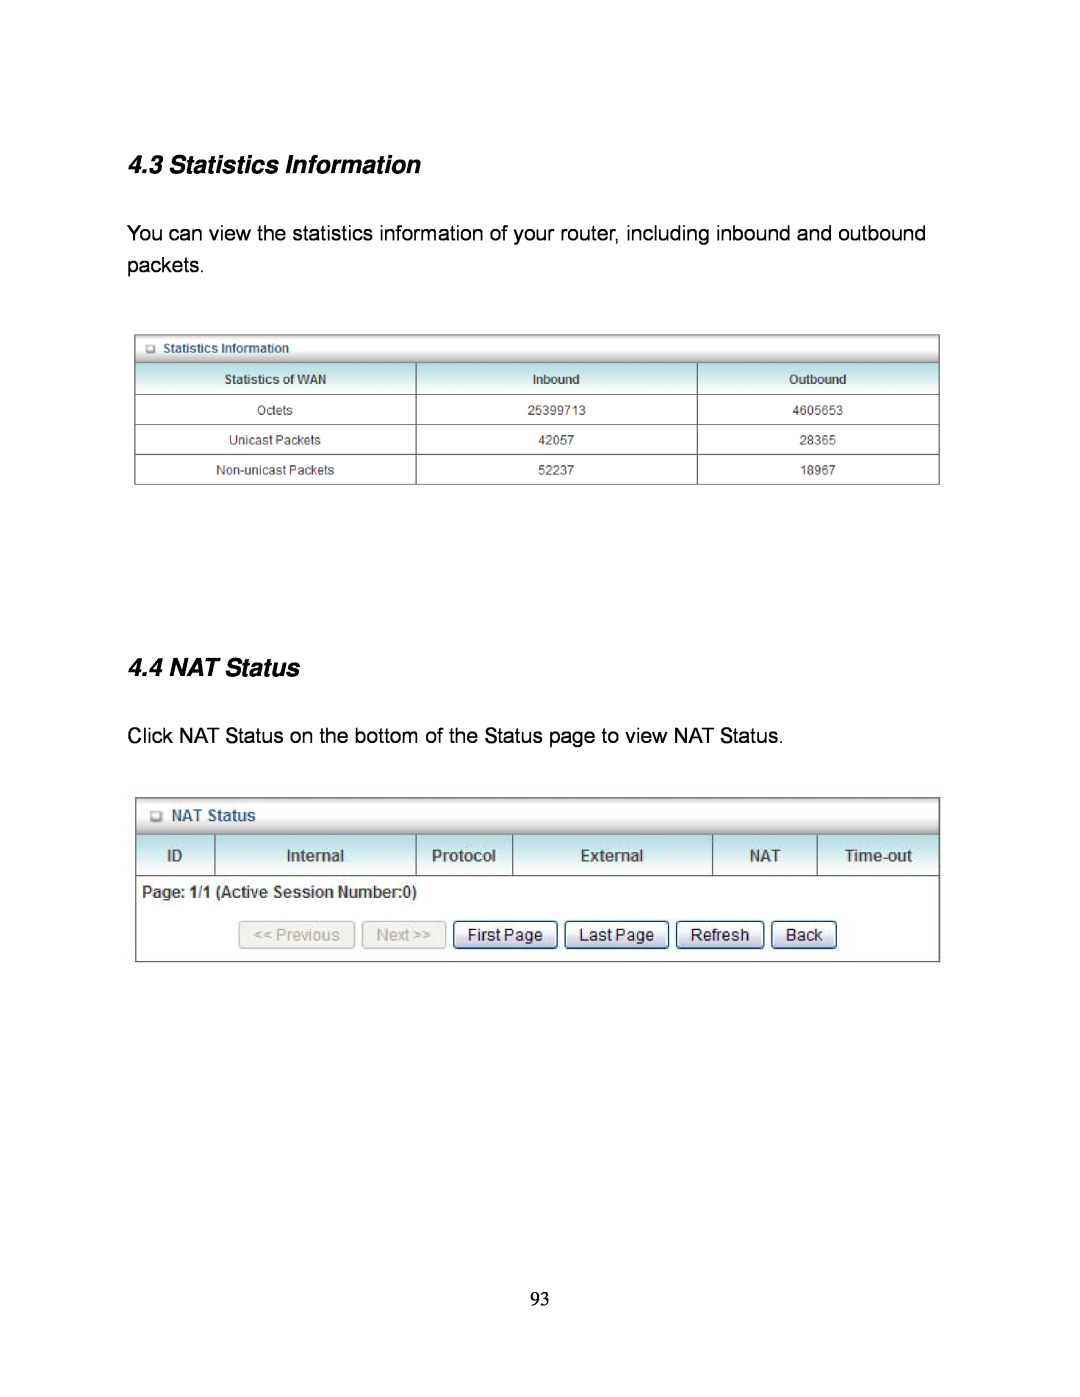 Airlink101 AR695W manual Statistics Information, Click NAT Status on the bottom of the Status page to view NAT Status 